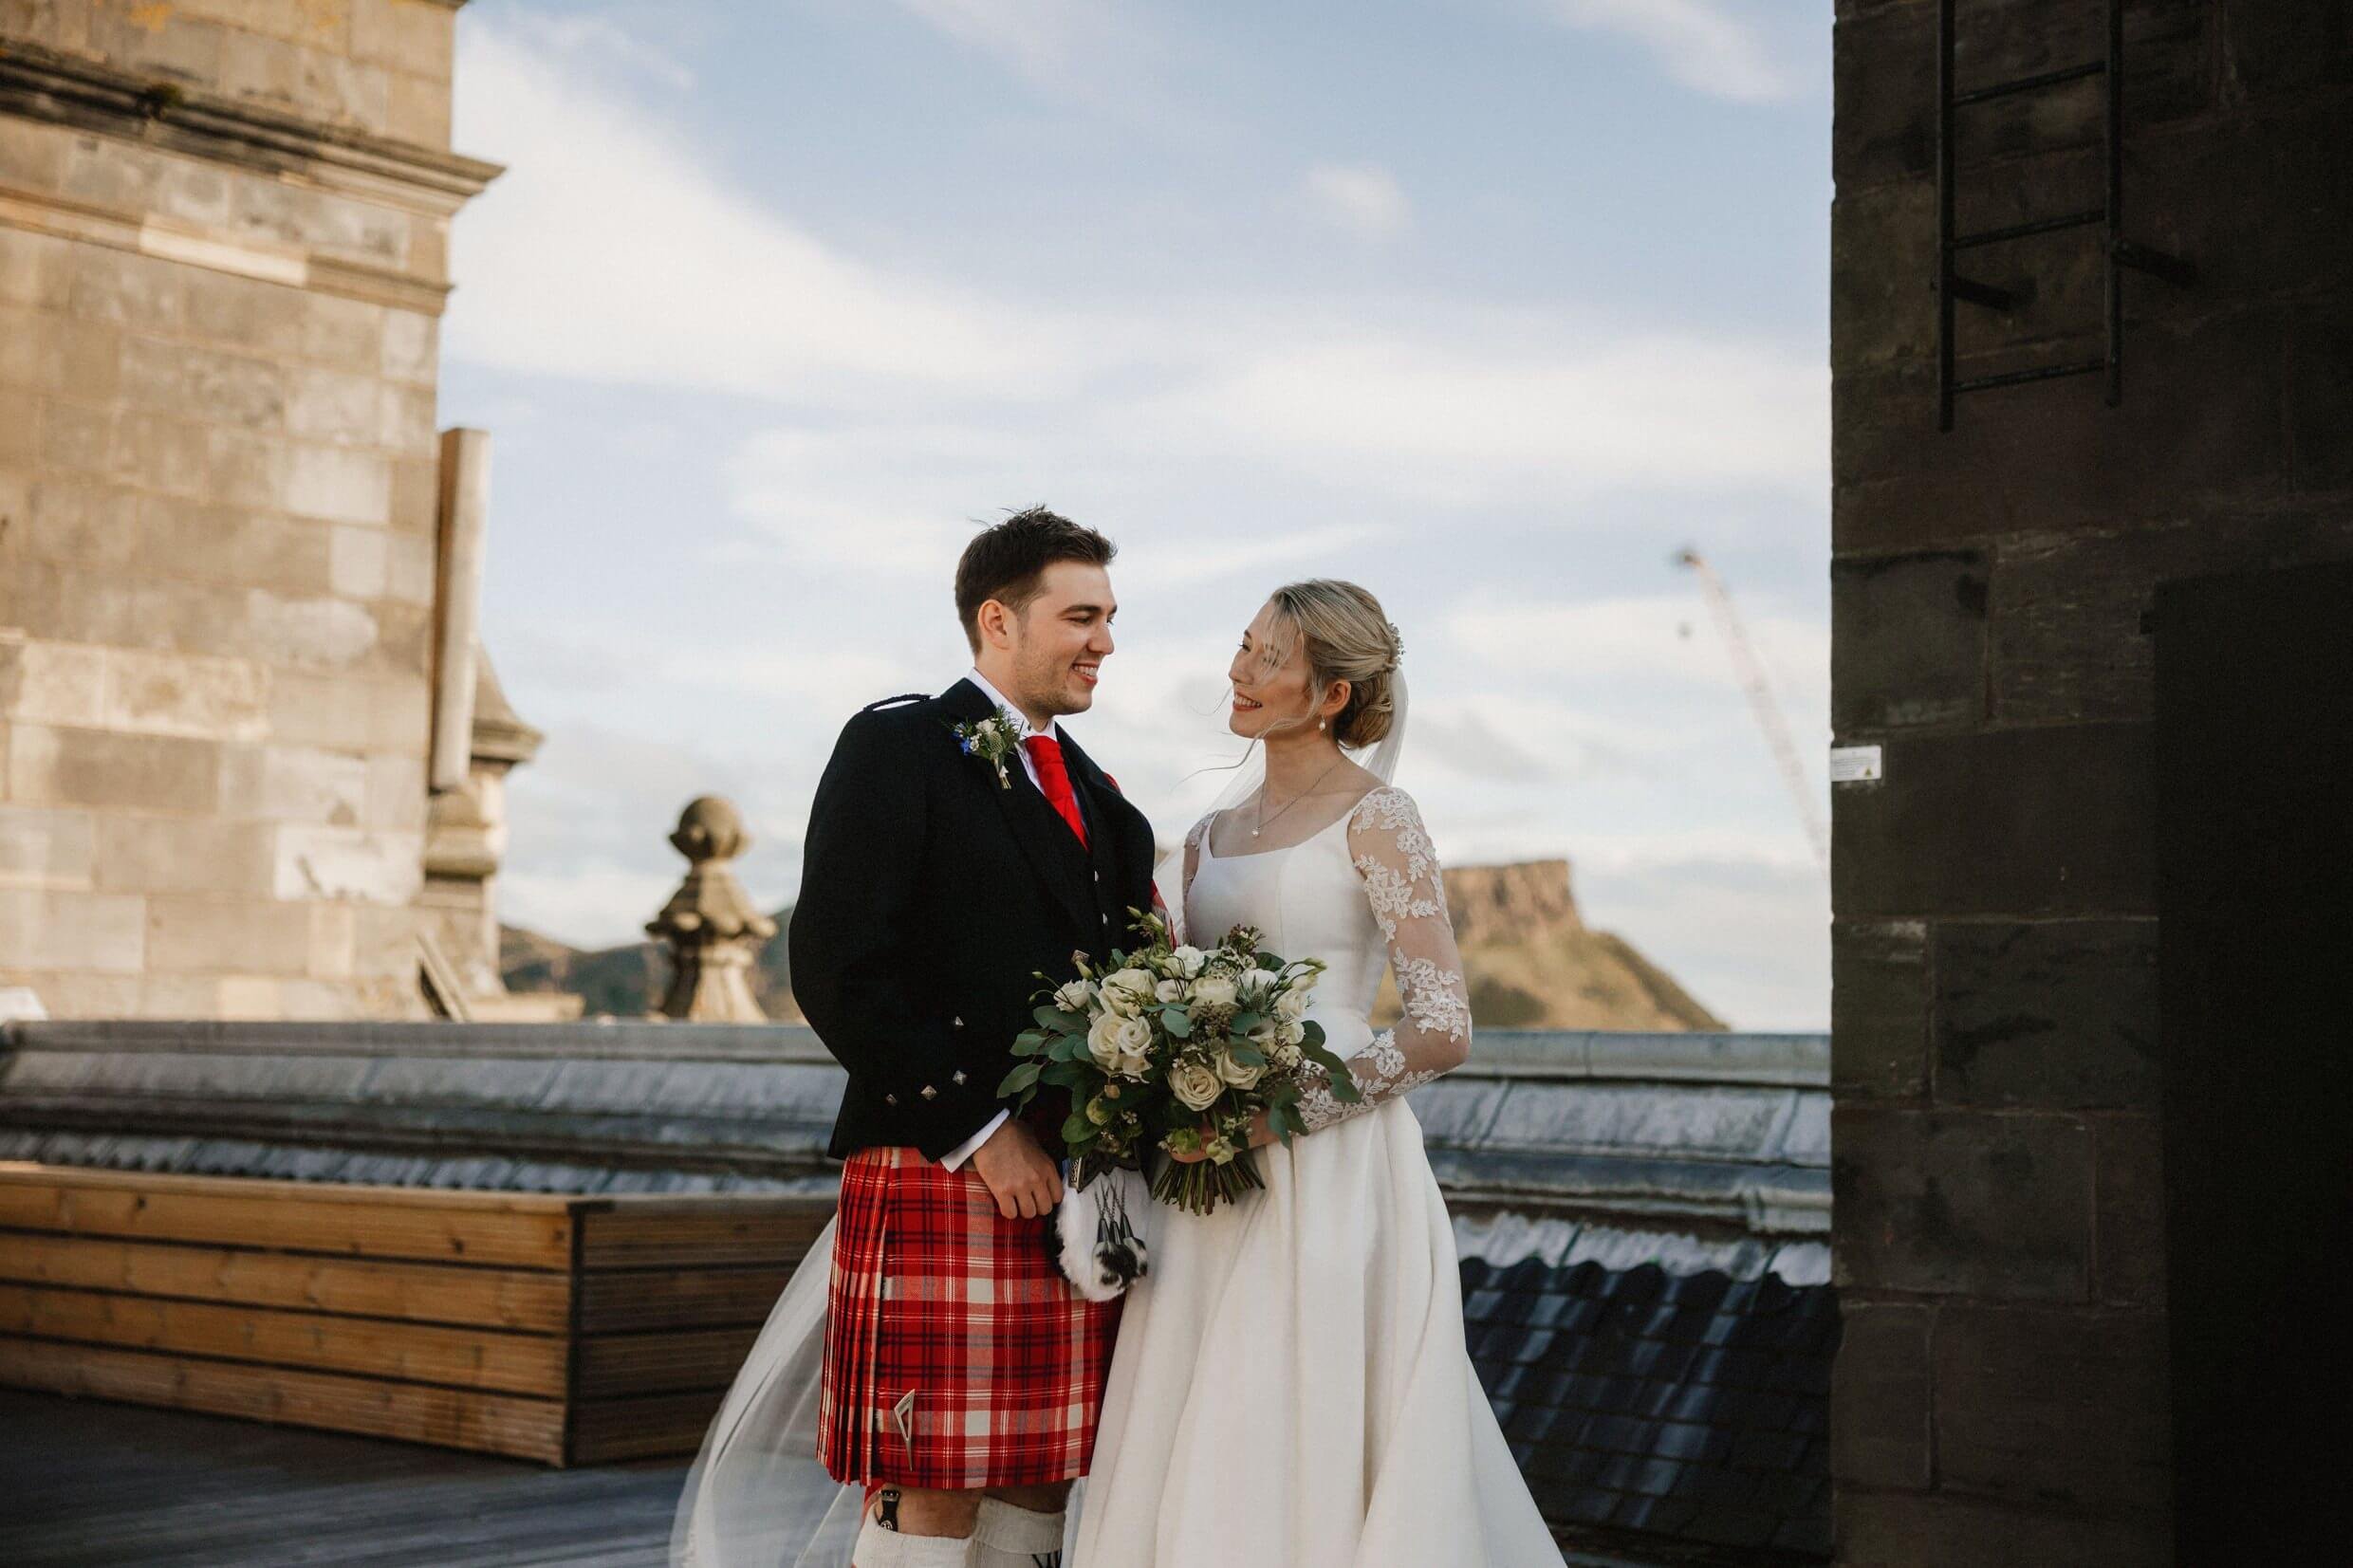 the bride and groom pose for photos on the rooftop of the balmoral hotel edinburgh wedding venue with arthur's seat visible in the background